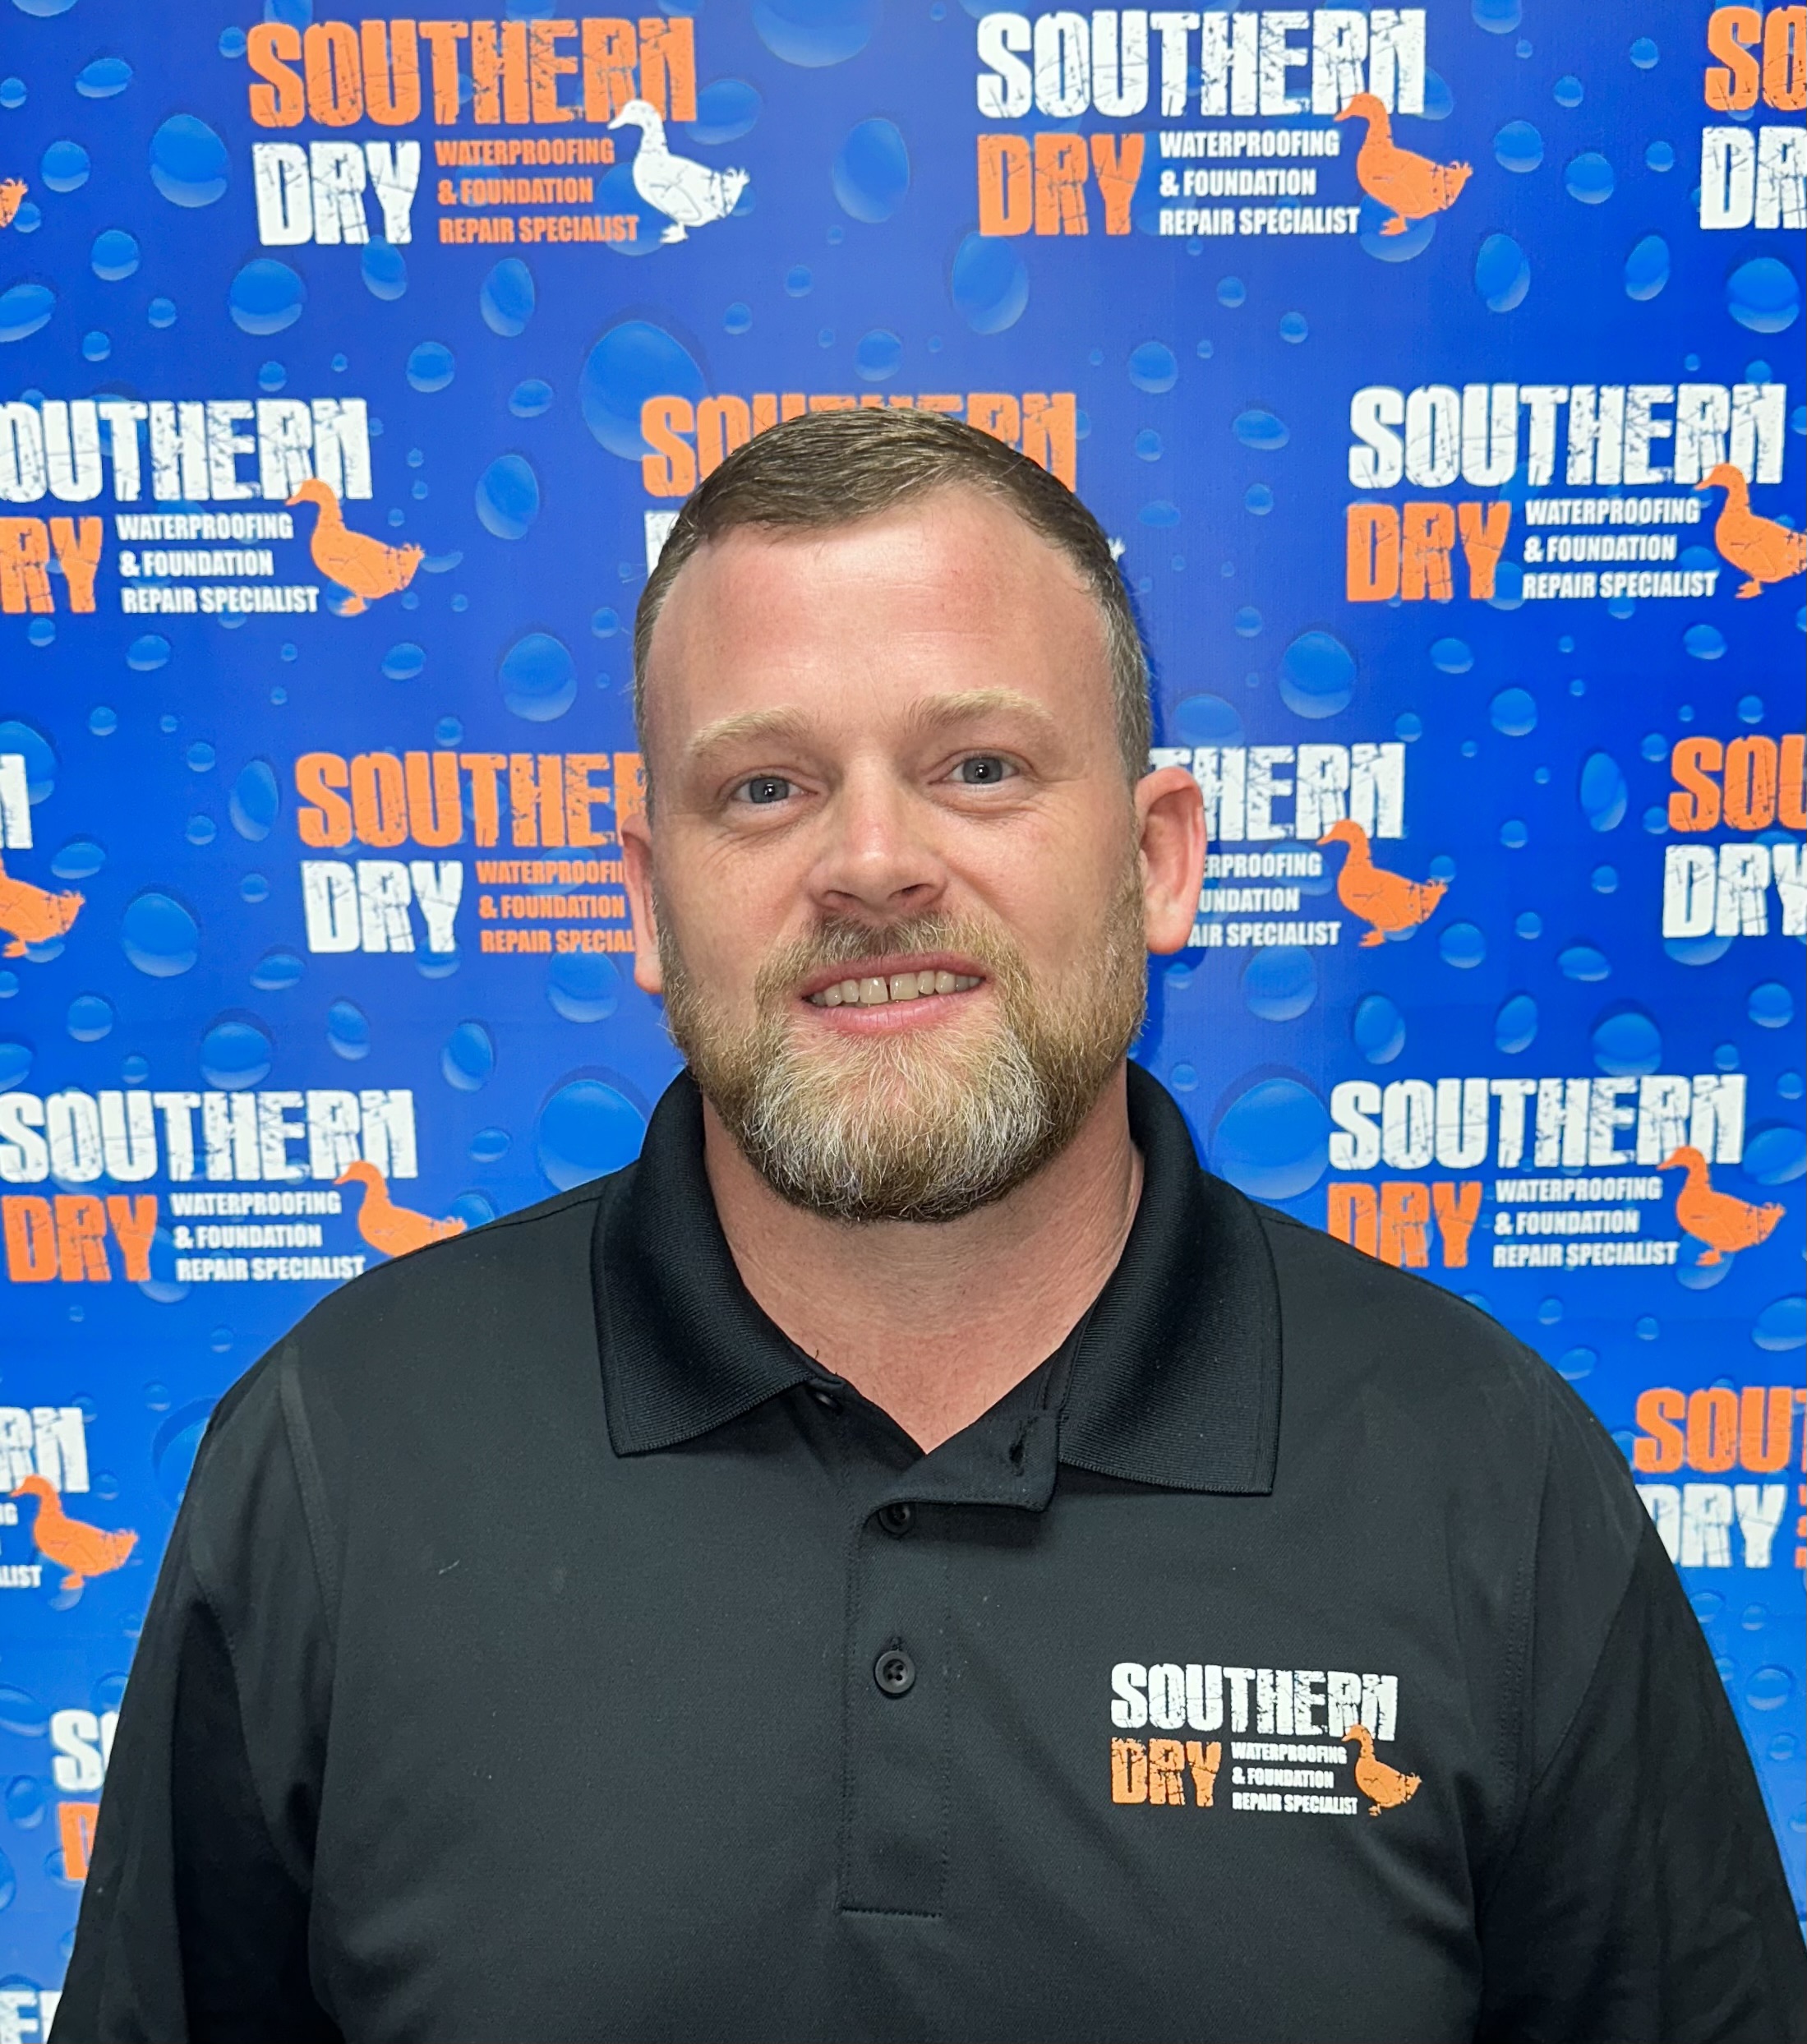 southerndry foundation repair expert - don alford